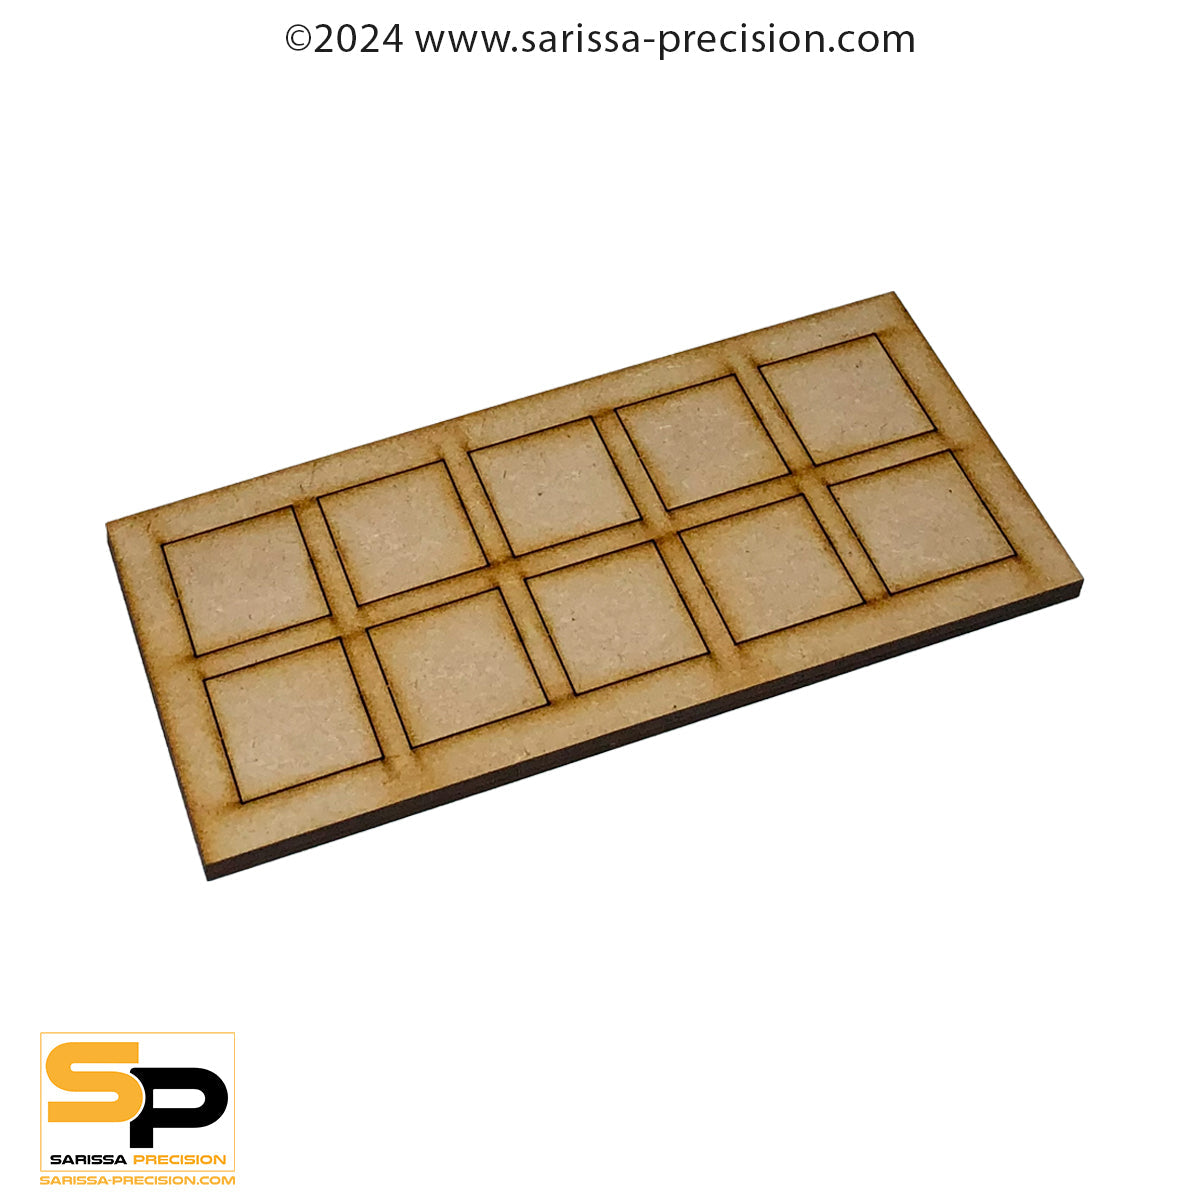 4x2 30x30mm Conversion Tray for 25x25mm bases